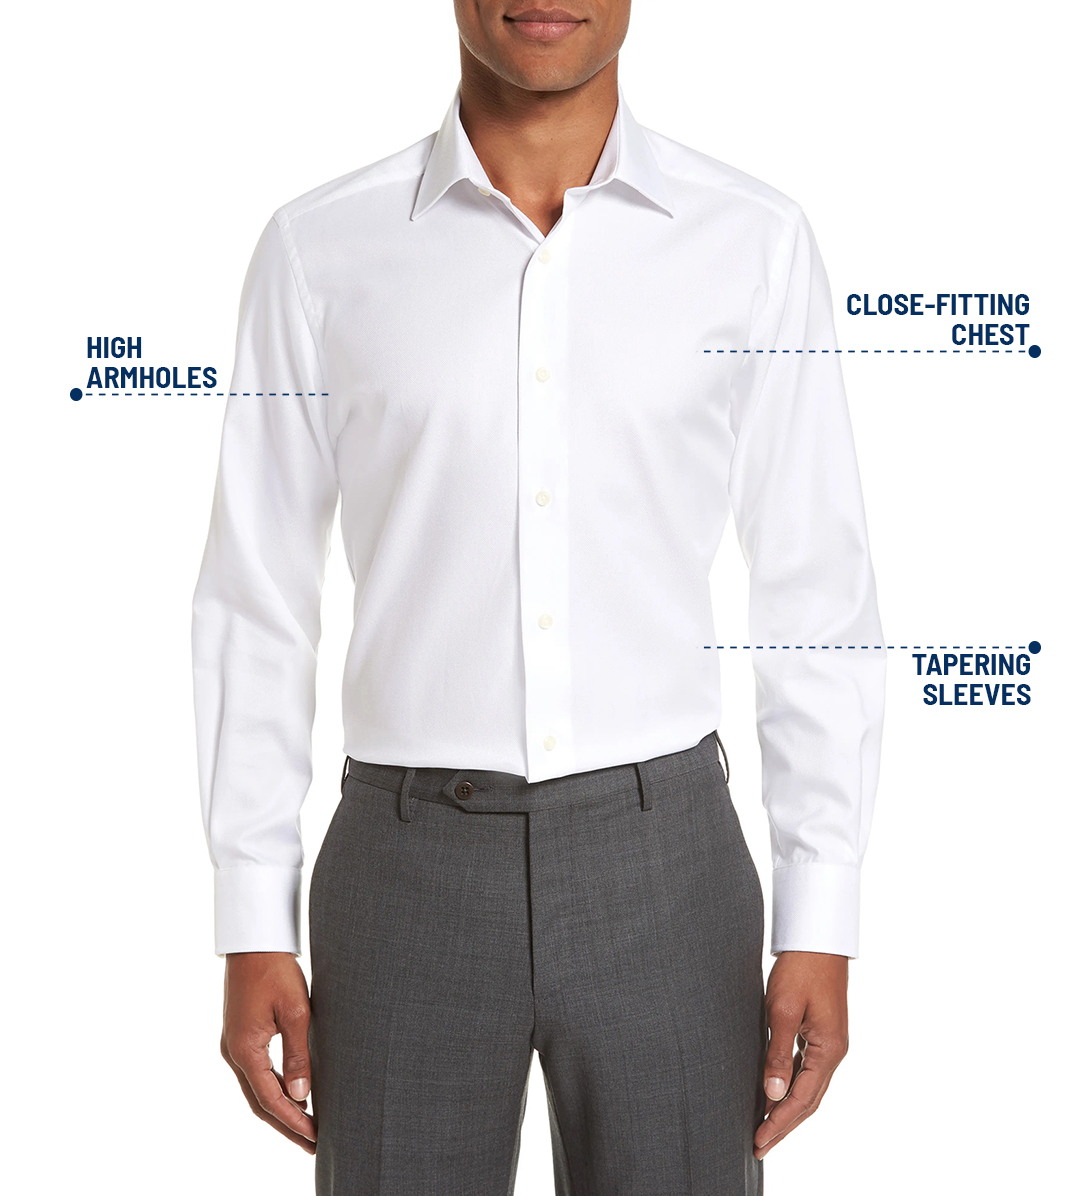 Features of a slim fit dress shirt